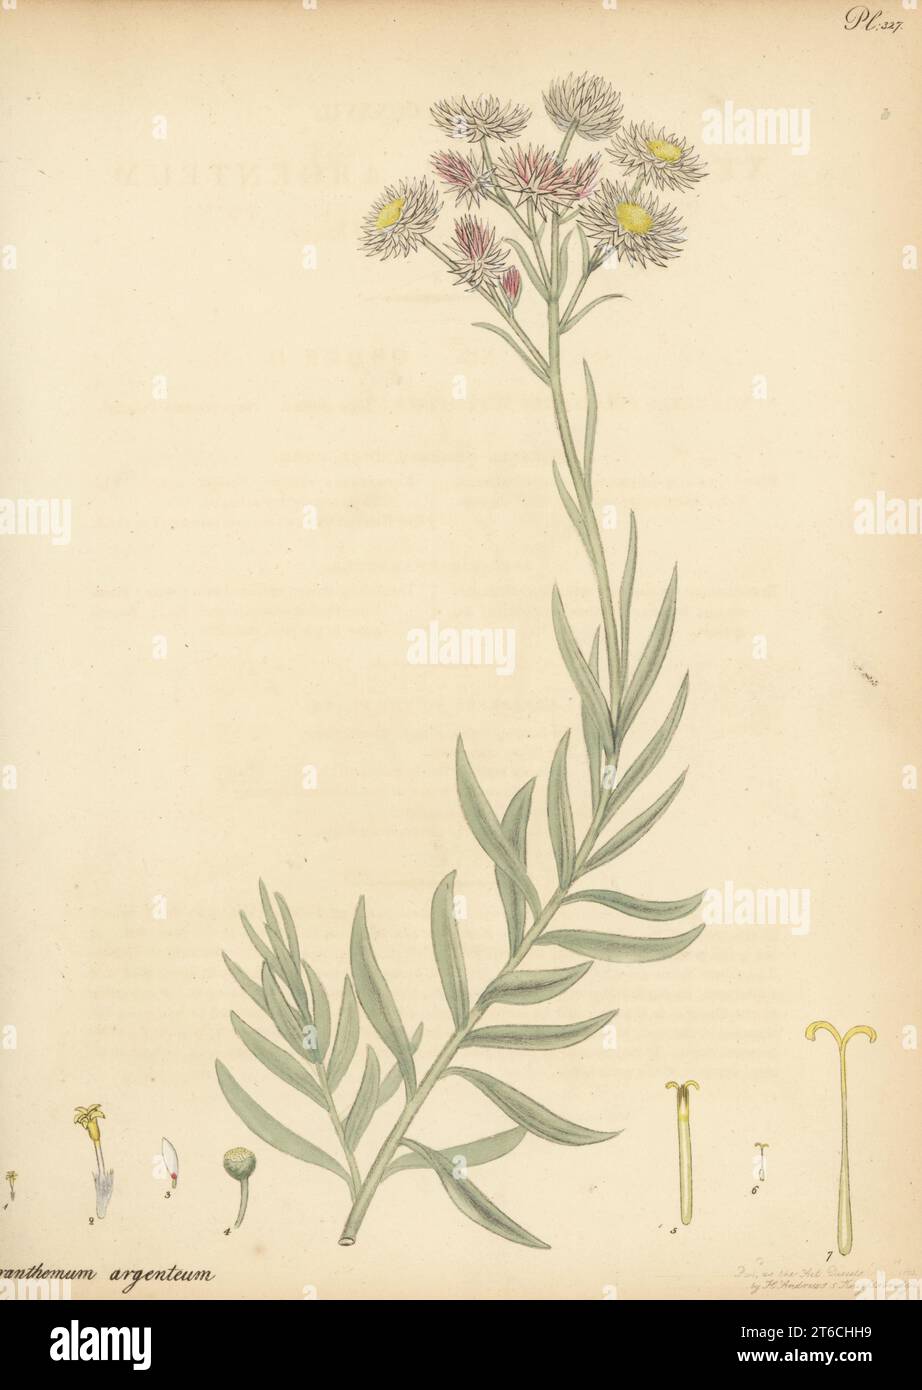 Chaff flower, Achyranthemum argenteum. Silvery everlasting-flower, Xeranthemum argenteum. Native of South Africa. From the collection of Elizabeth Burgoyne, Mrs Montagu Burgoyne, Mark Hall, Essex. Copperplate engraving drawn, engraved and hand-coloured by Henry Andrews from his Botanical Register, Volume 5, self-published in Knightsbridge, London, 1803. Stock Photo